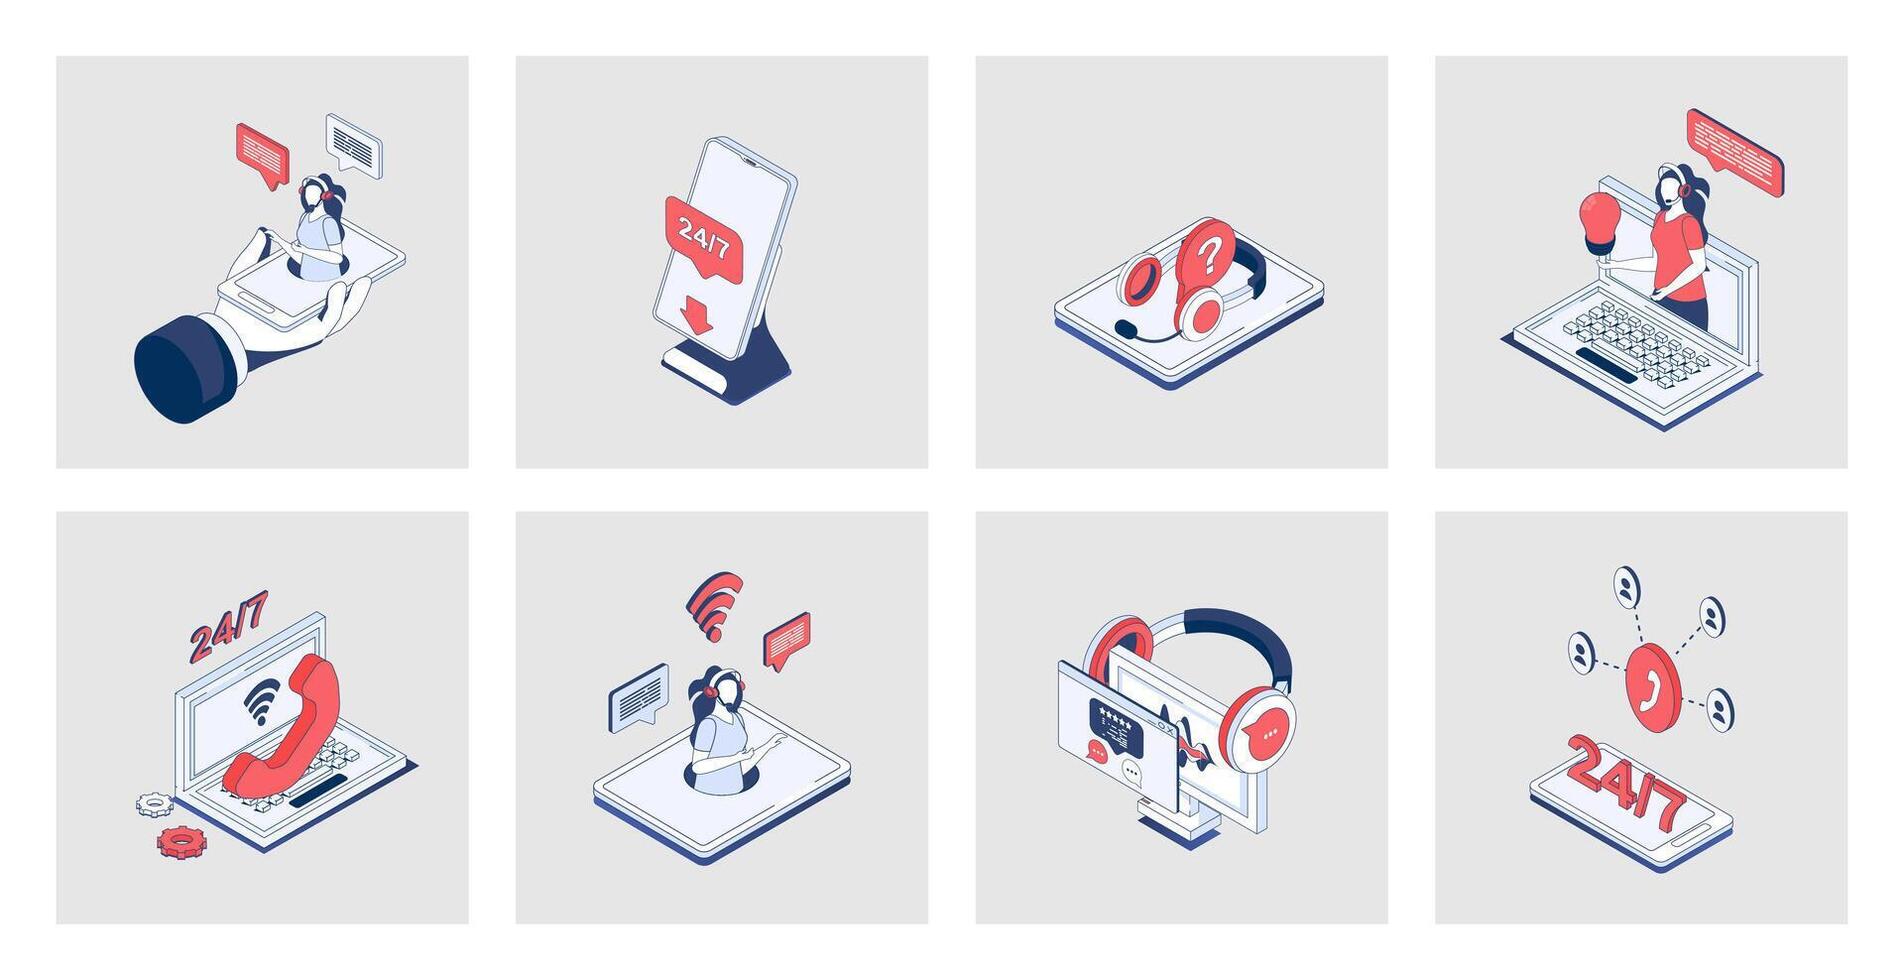 Customer support concept of isometric icons in 3d isometry design for web. Online assistance and business communication, technical solution center with operators, client feedback. Vector illustration